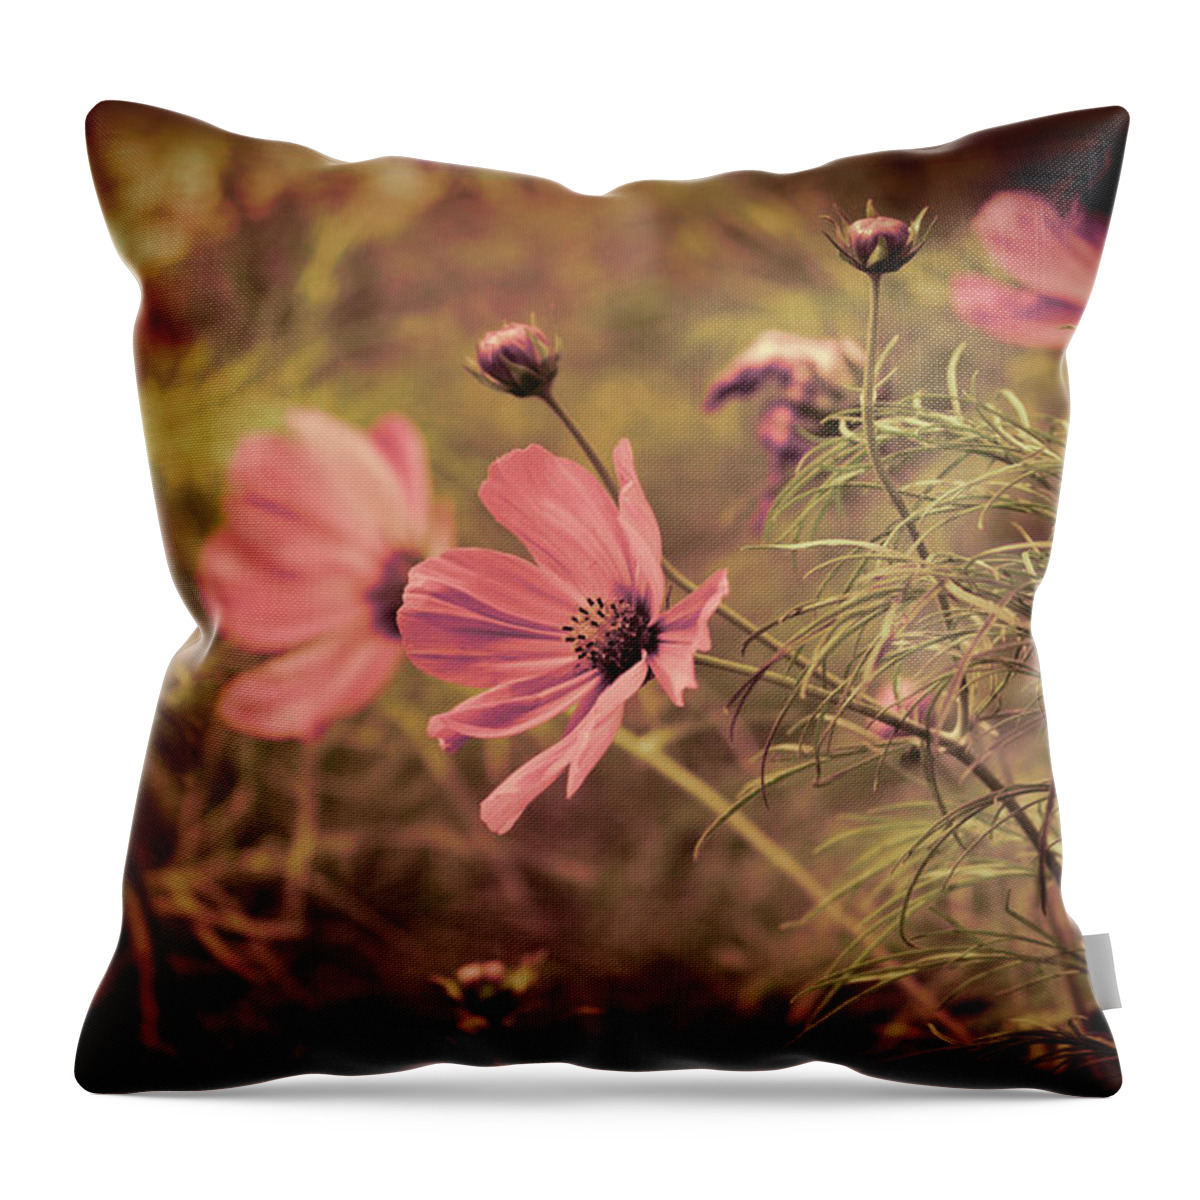 Vintage Throw Pillow featuring the photograph Vintage Cosmos by Douglas MooreZart